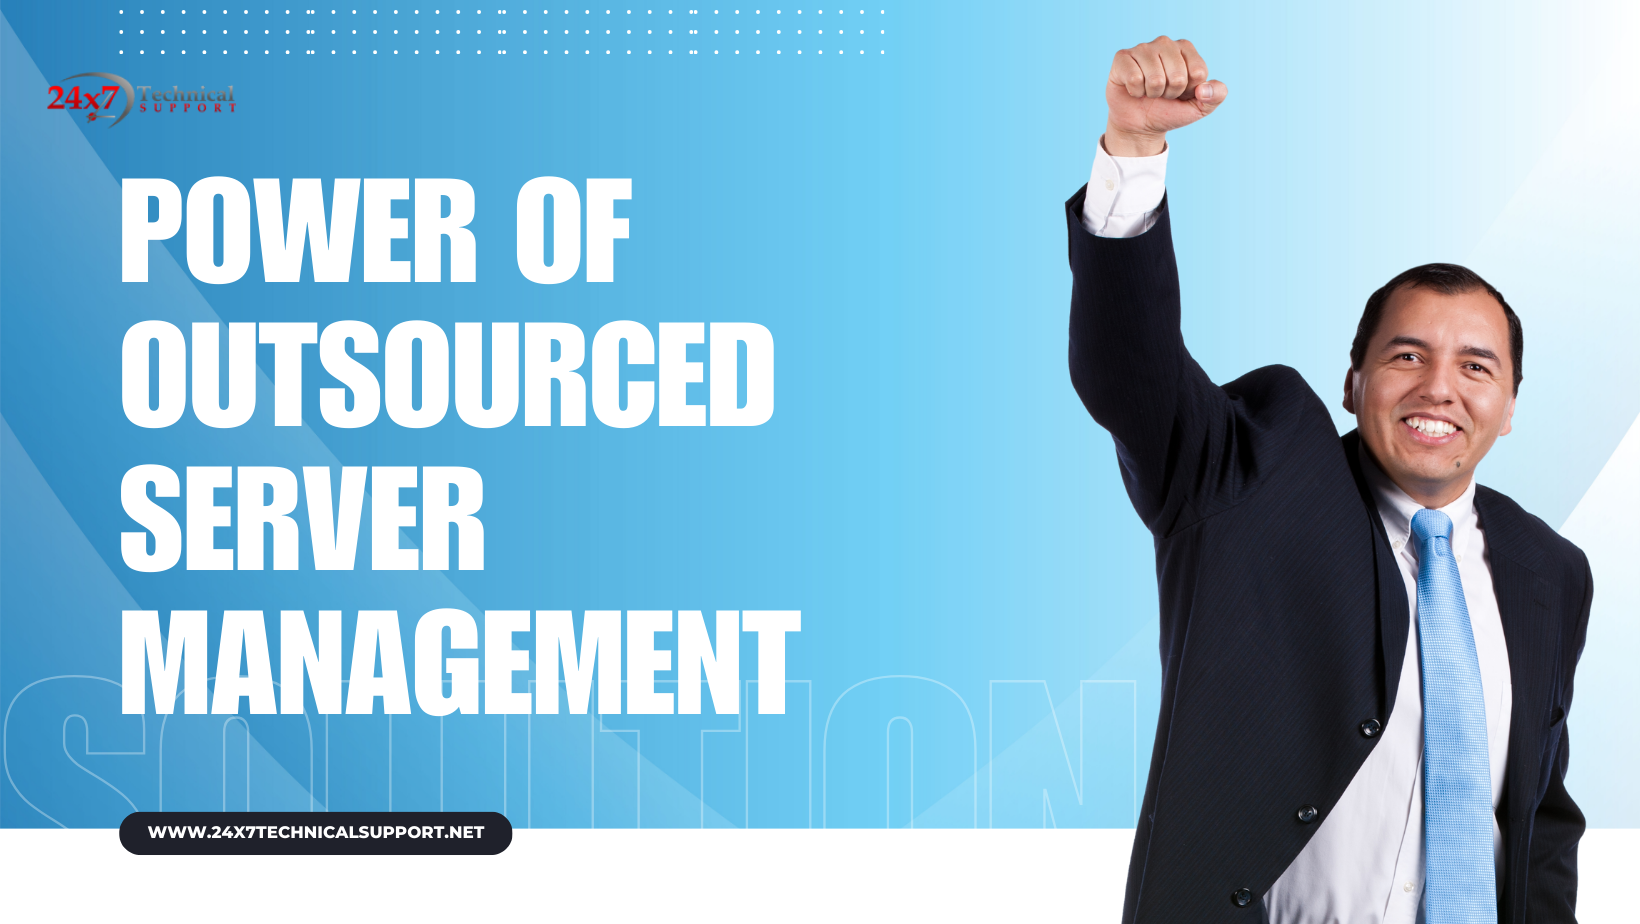 Outsourced server management